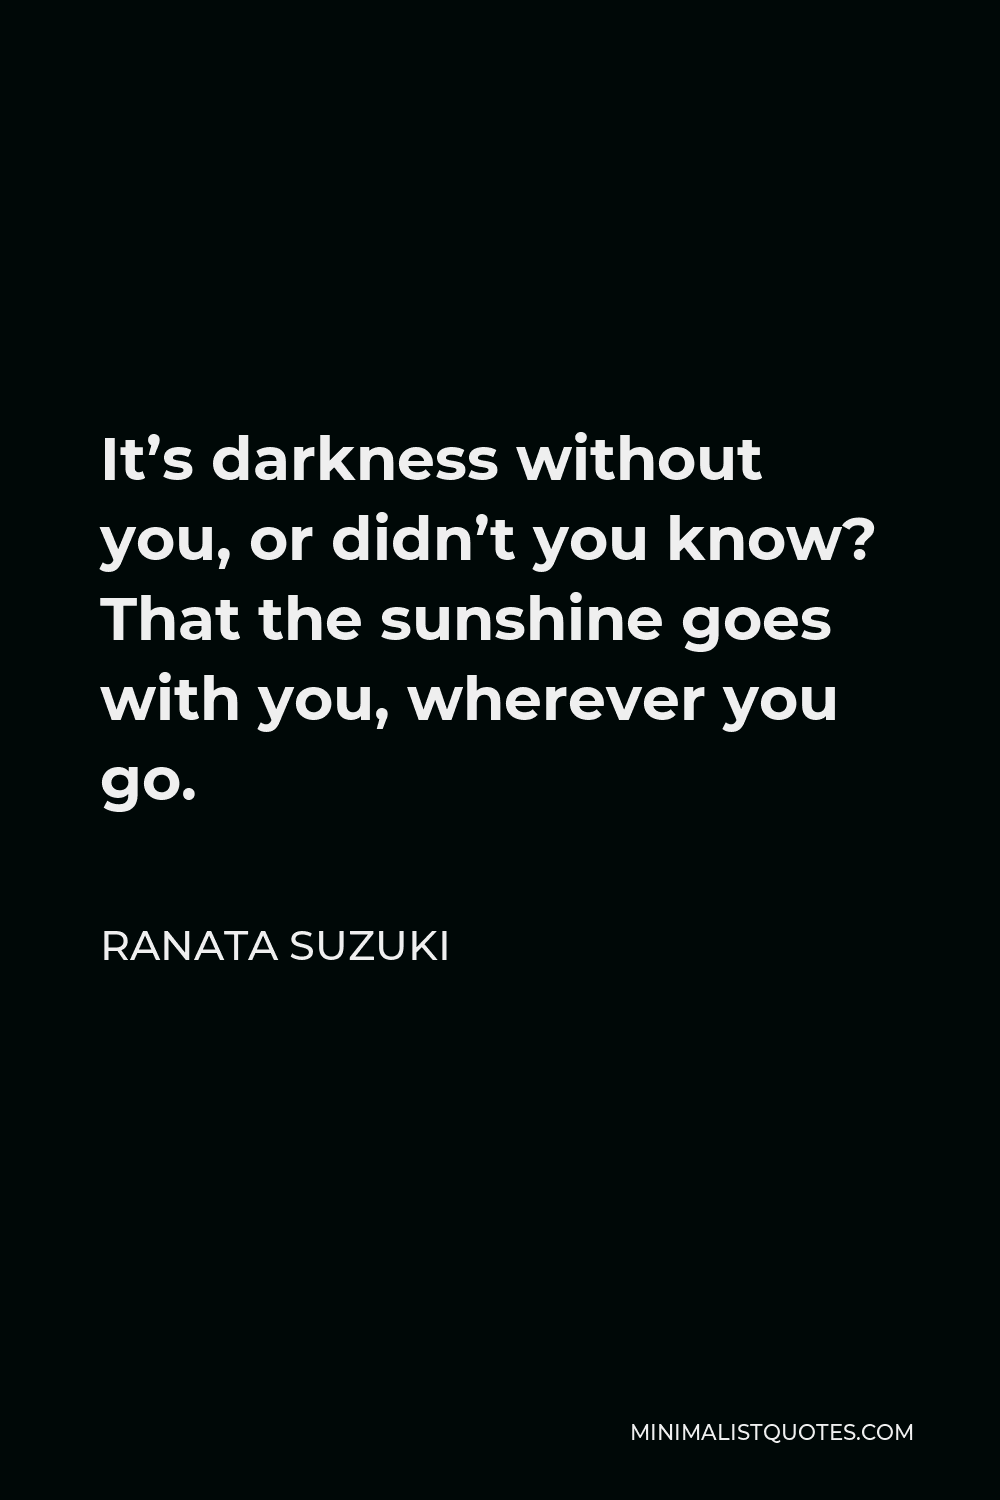 Ranata Suzuki Quote - It’s darkness without you, or didn’t you know? That the sunshine goes with you, wherever you go.